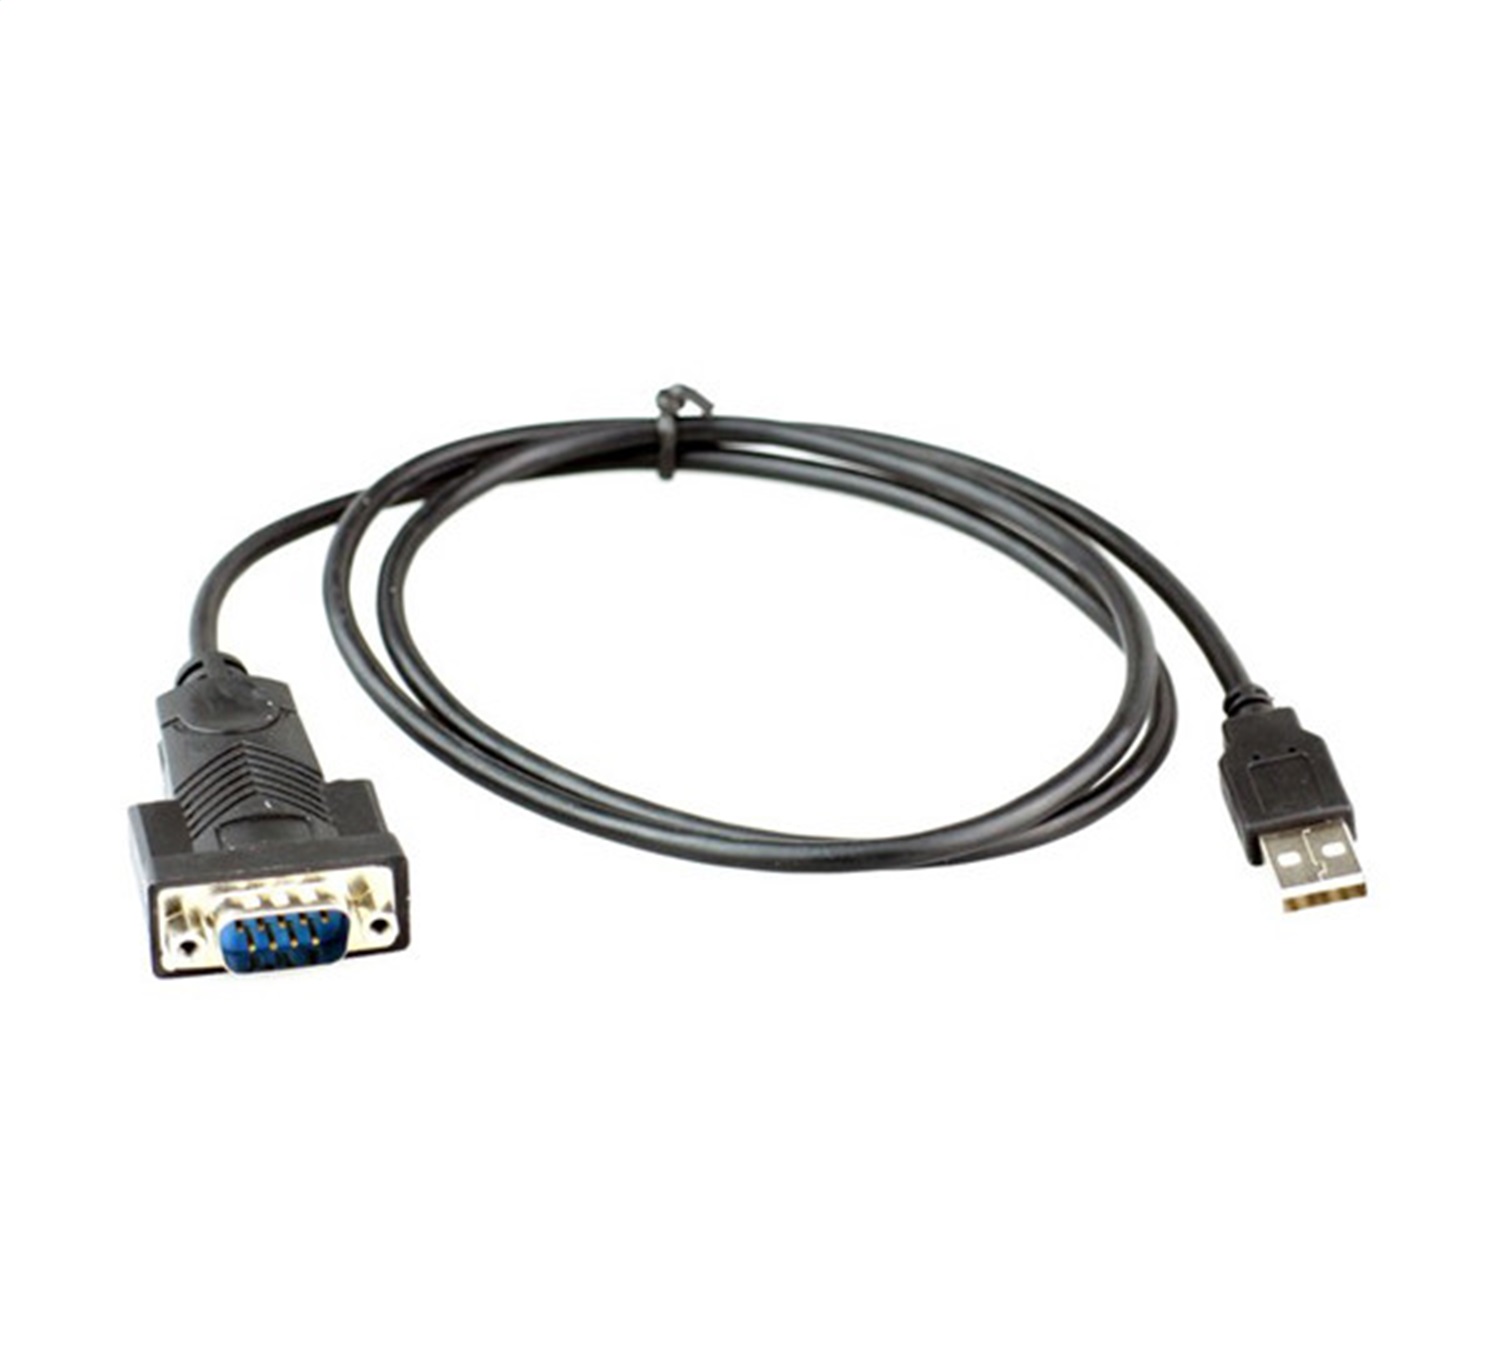 USB To Serial Adapter; Features 9-Pin Serial Connector / USB Connector; - 890-CA-USB2SER